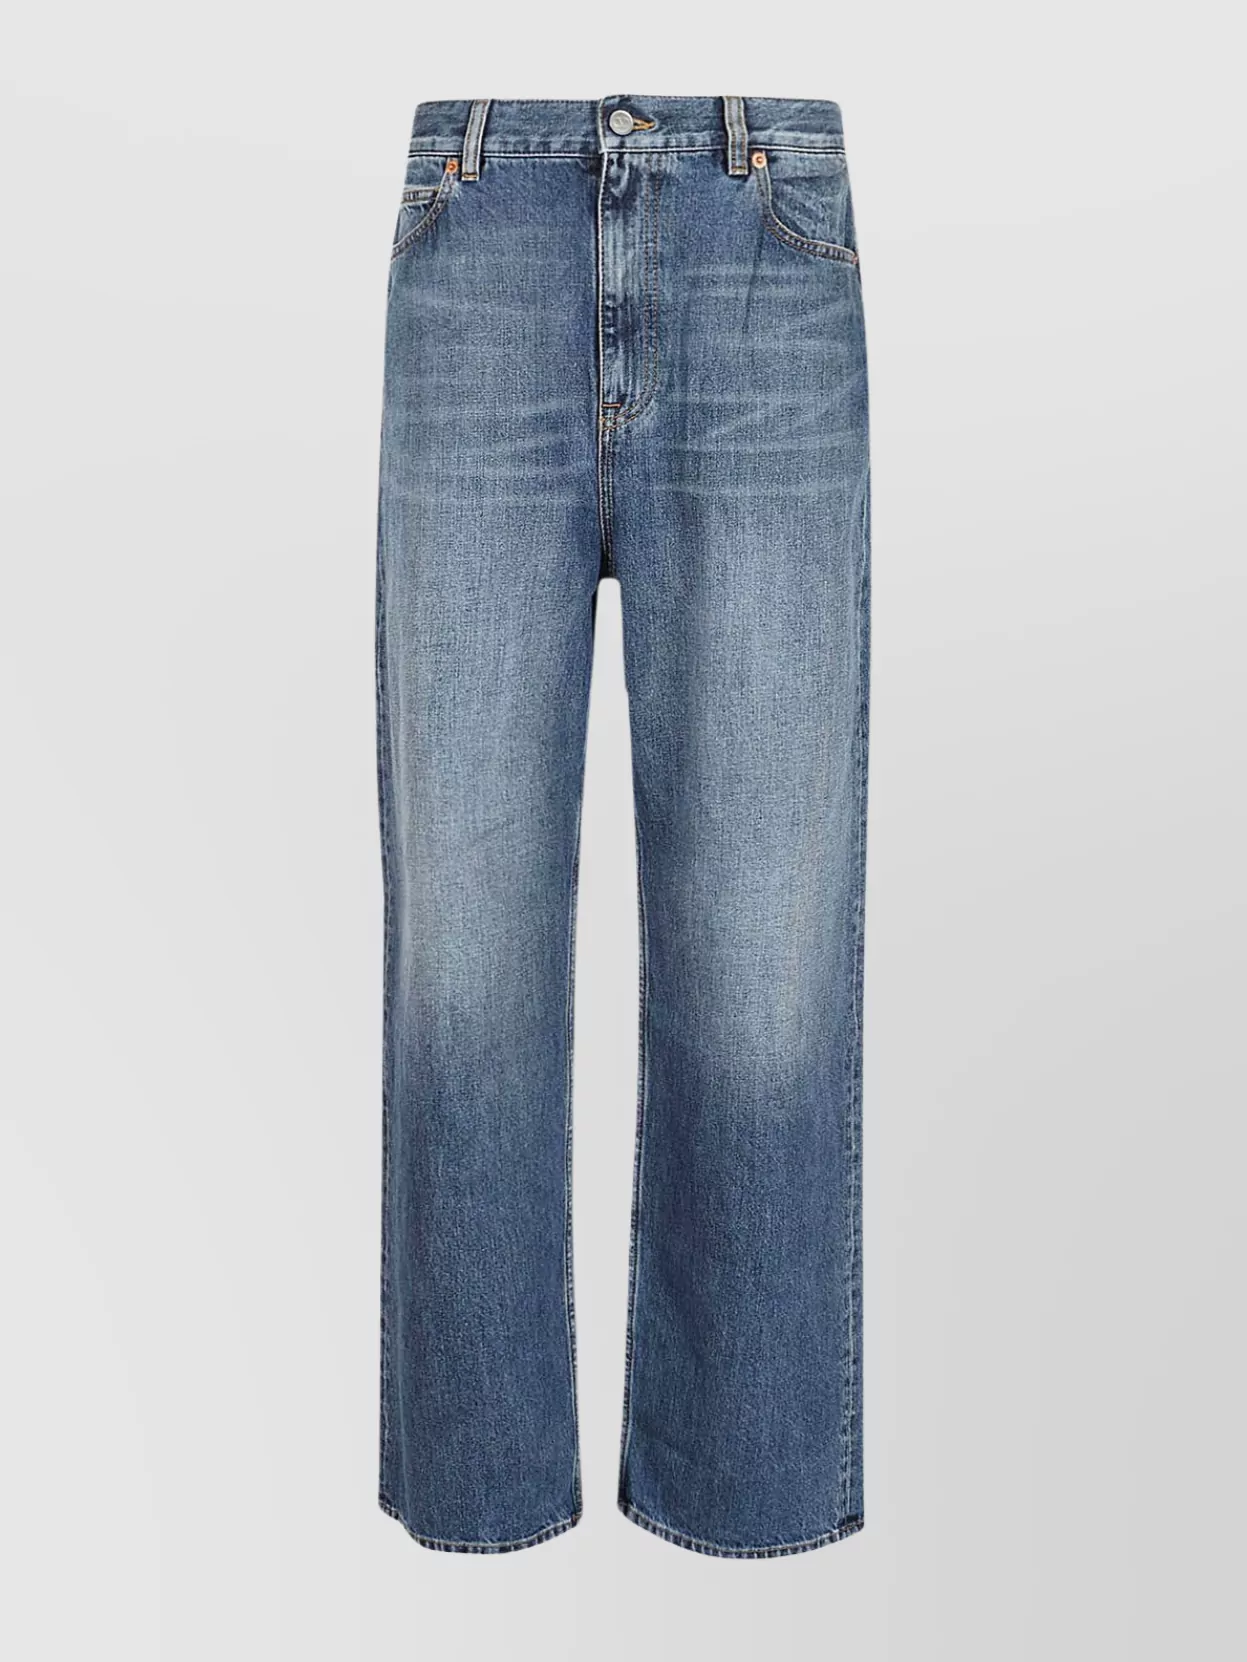 Shop Valentino Denim Trousers With Wide Leg And Belt Loops